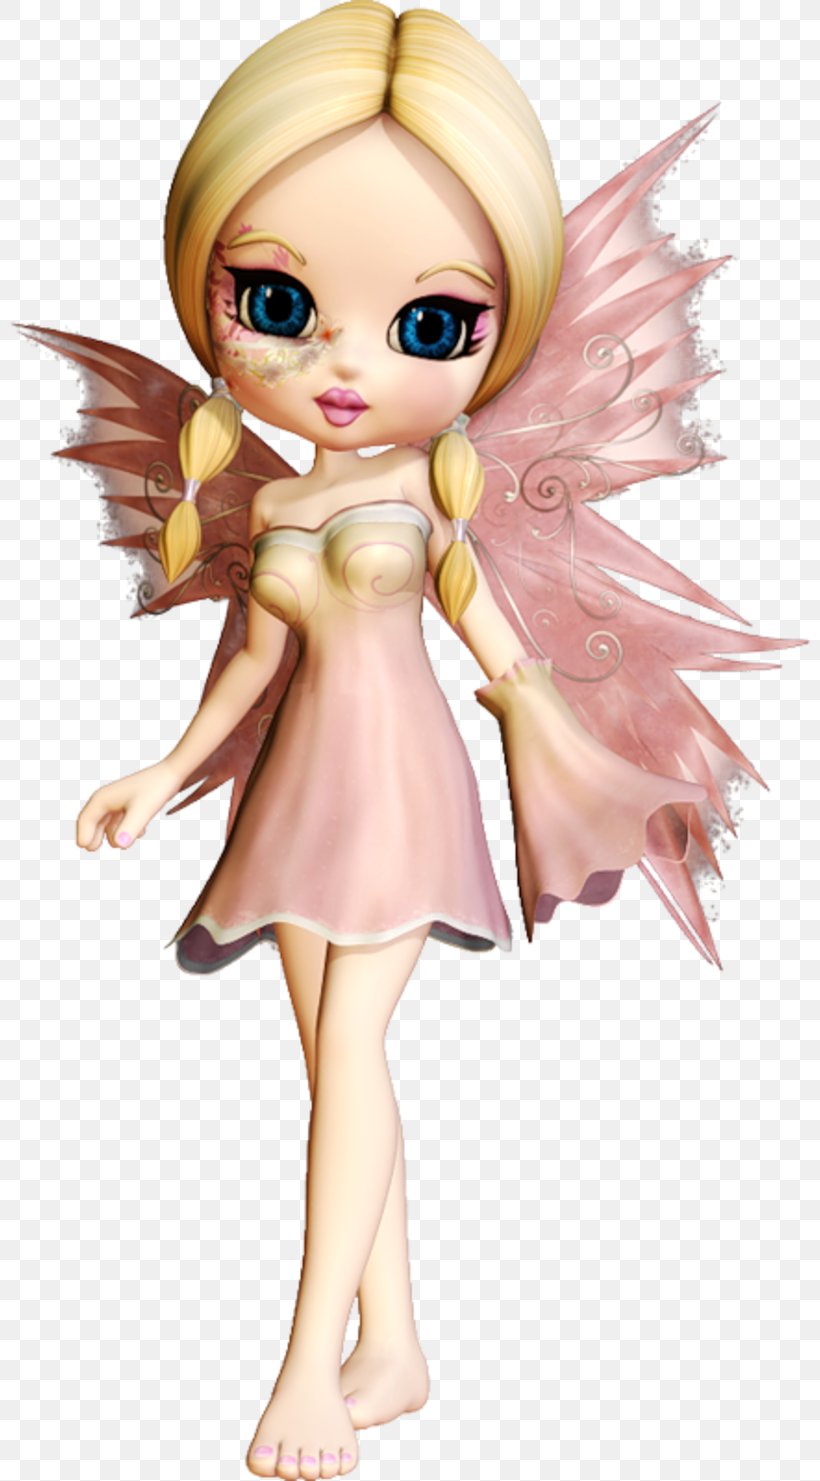 Pixie Hollow Fairy Doll Elf Figurine, PNG, 800x1481px, Pixie Hollow, Angel, Biscuit, Biscuits, Brown Hair Download Free